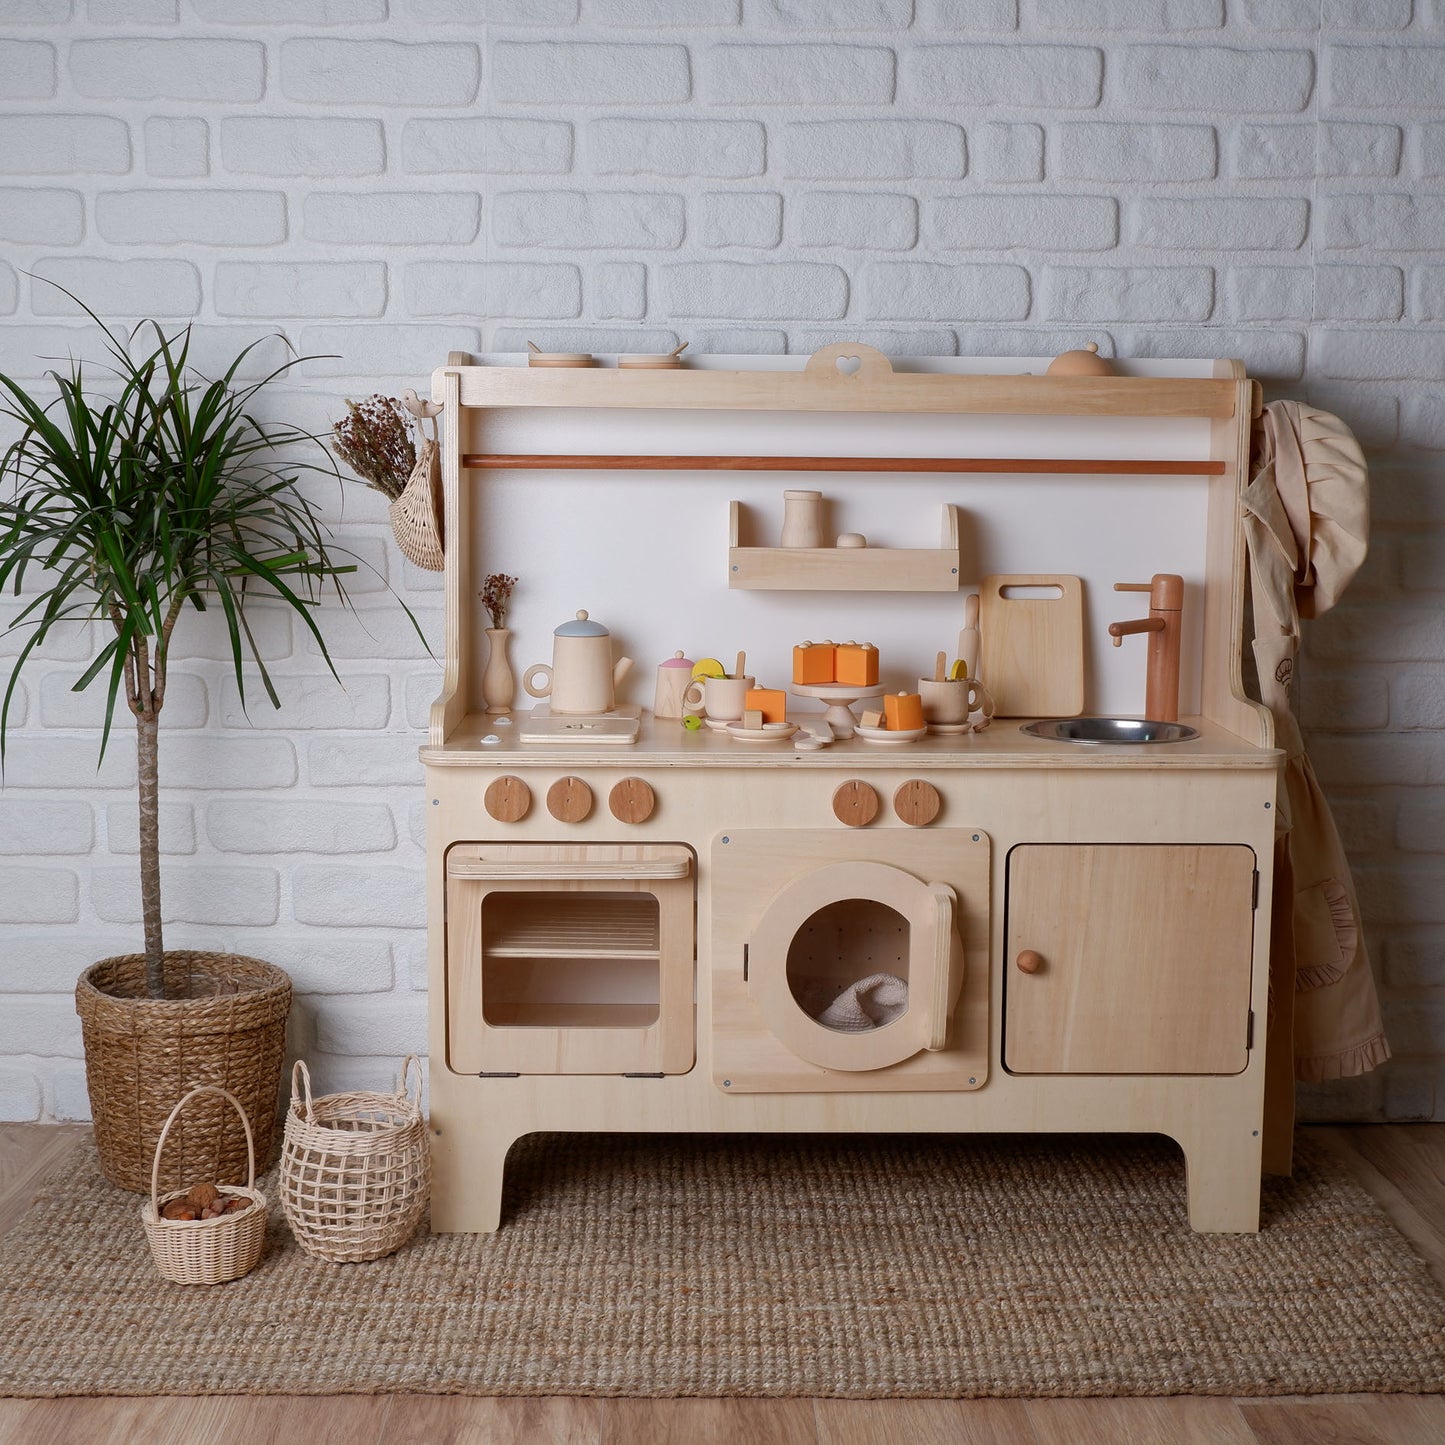 Wooden Play Kitchen Customizable Natural Wood